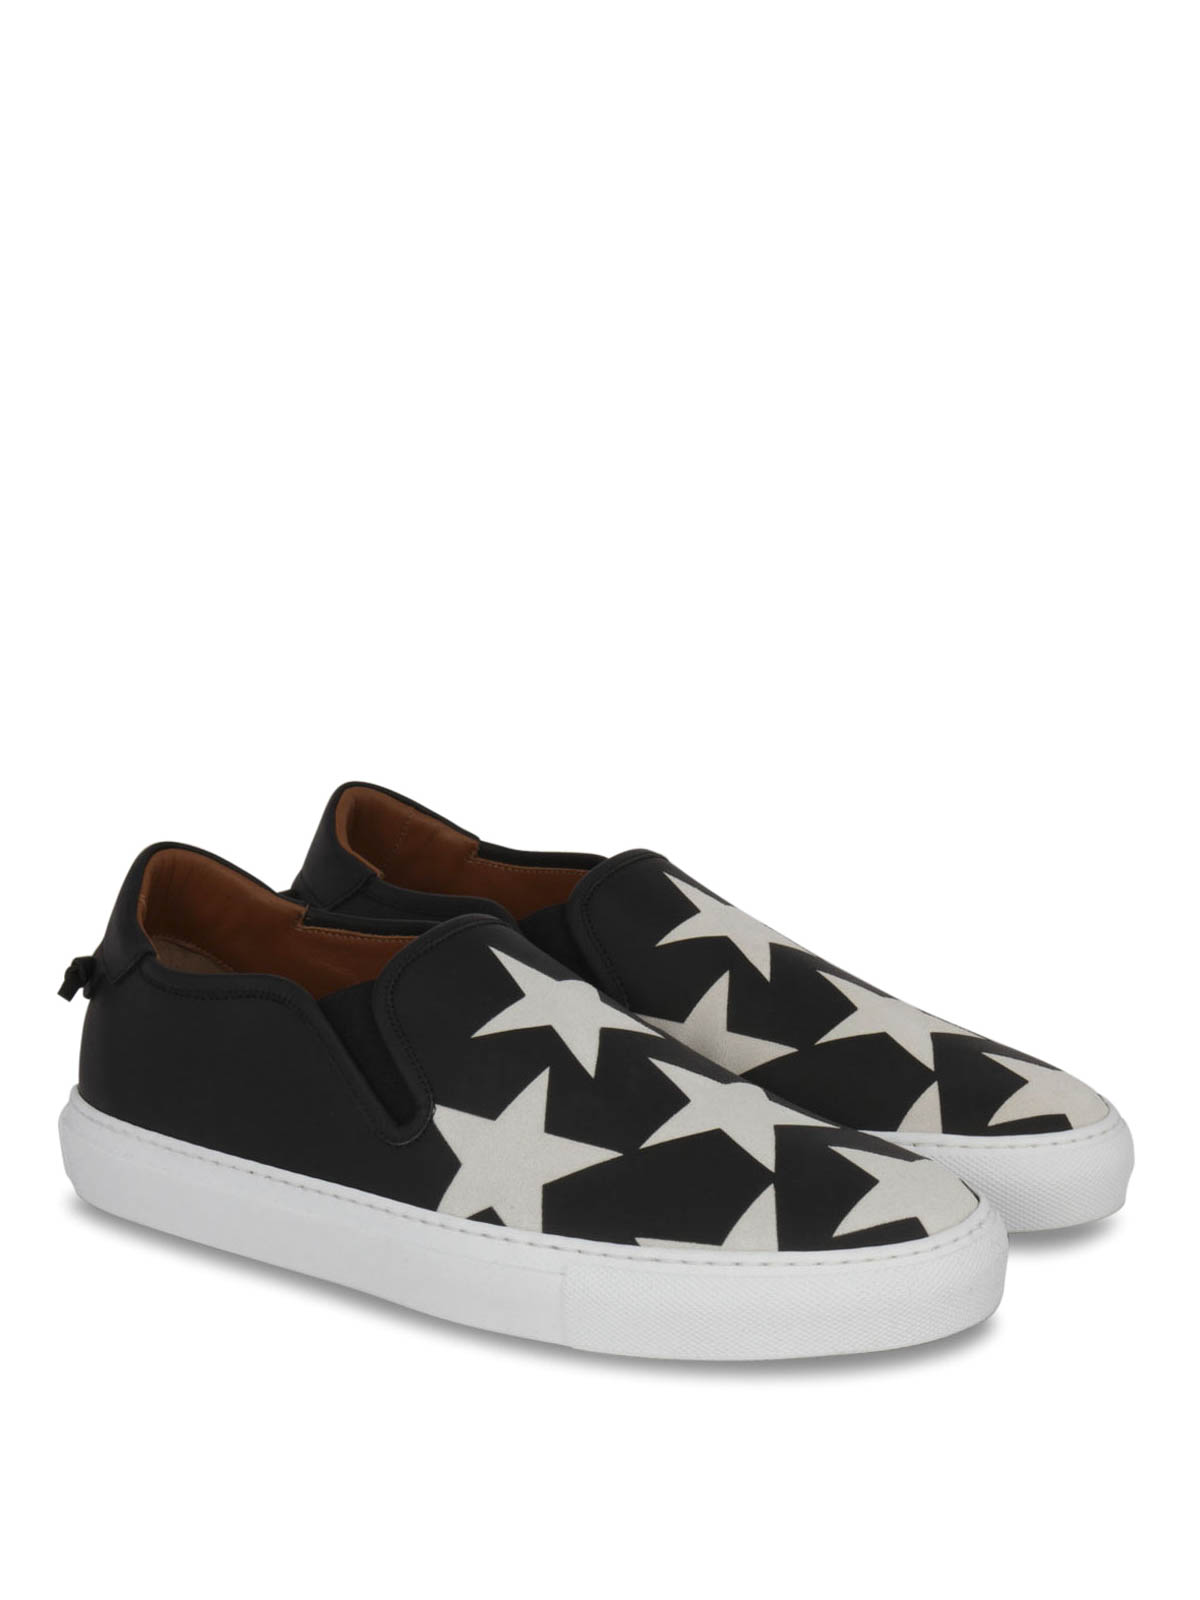 Givenchy - Star print leather slip-ons 